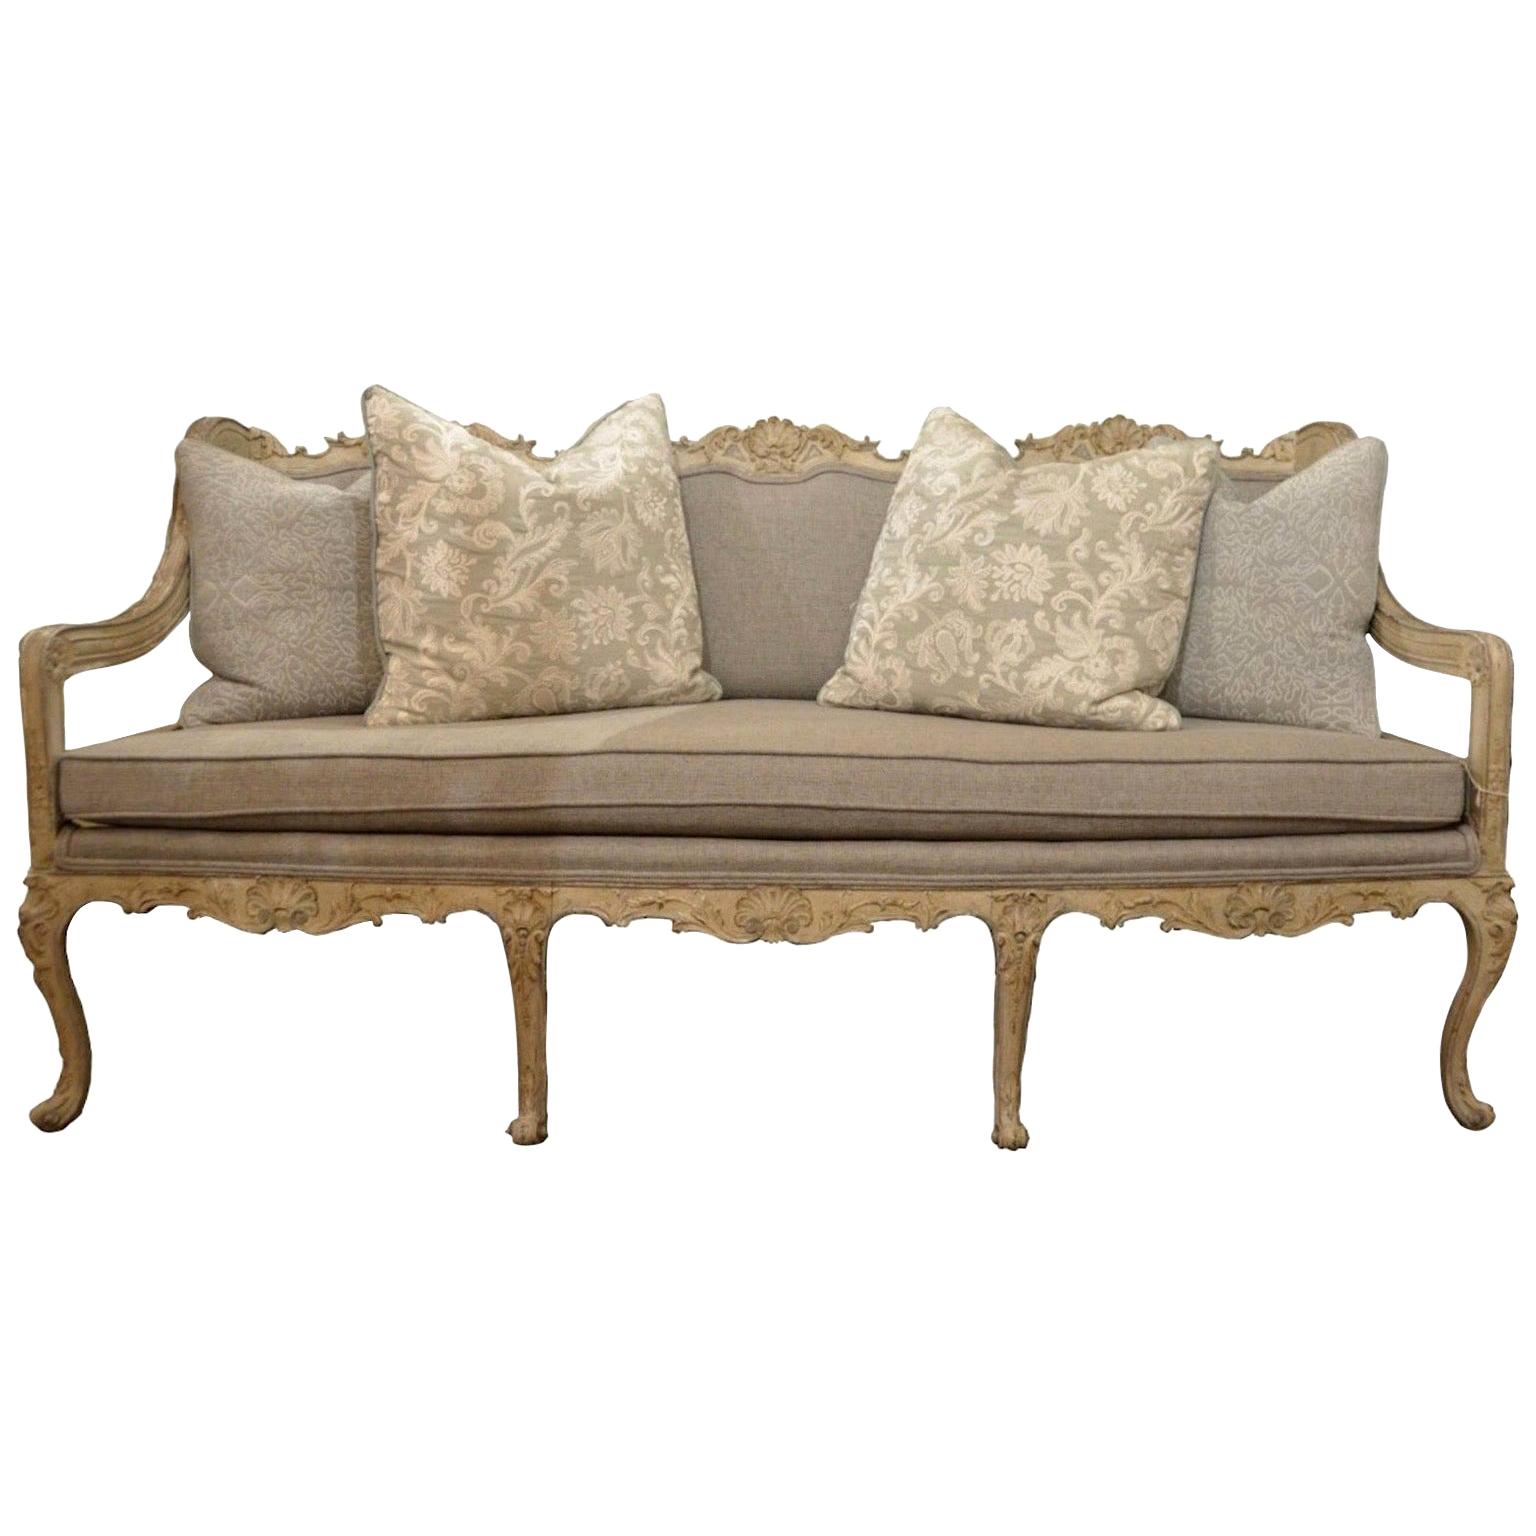 Antique French Carved and Painted Grisaille Upholstered Sofa For Sale